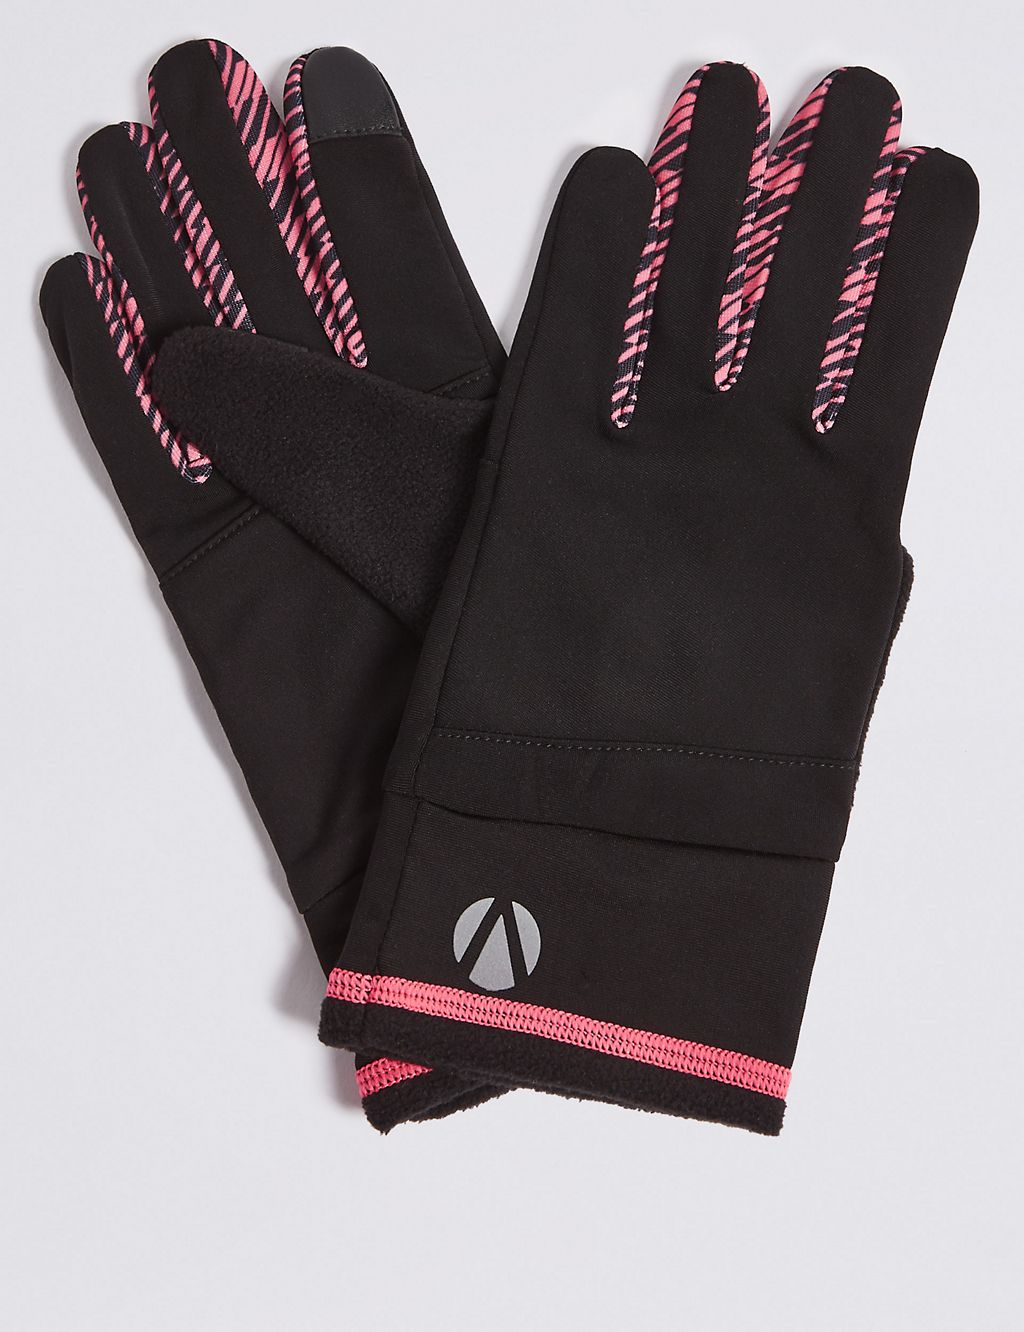 Printed Running Gloves 1 of 2